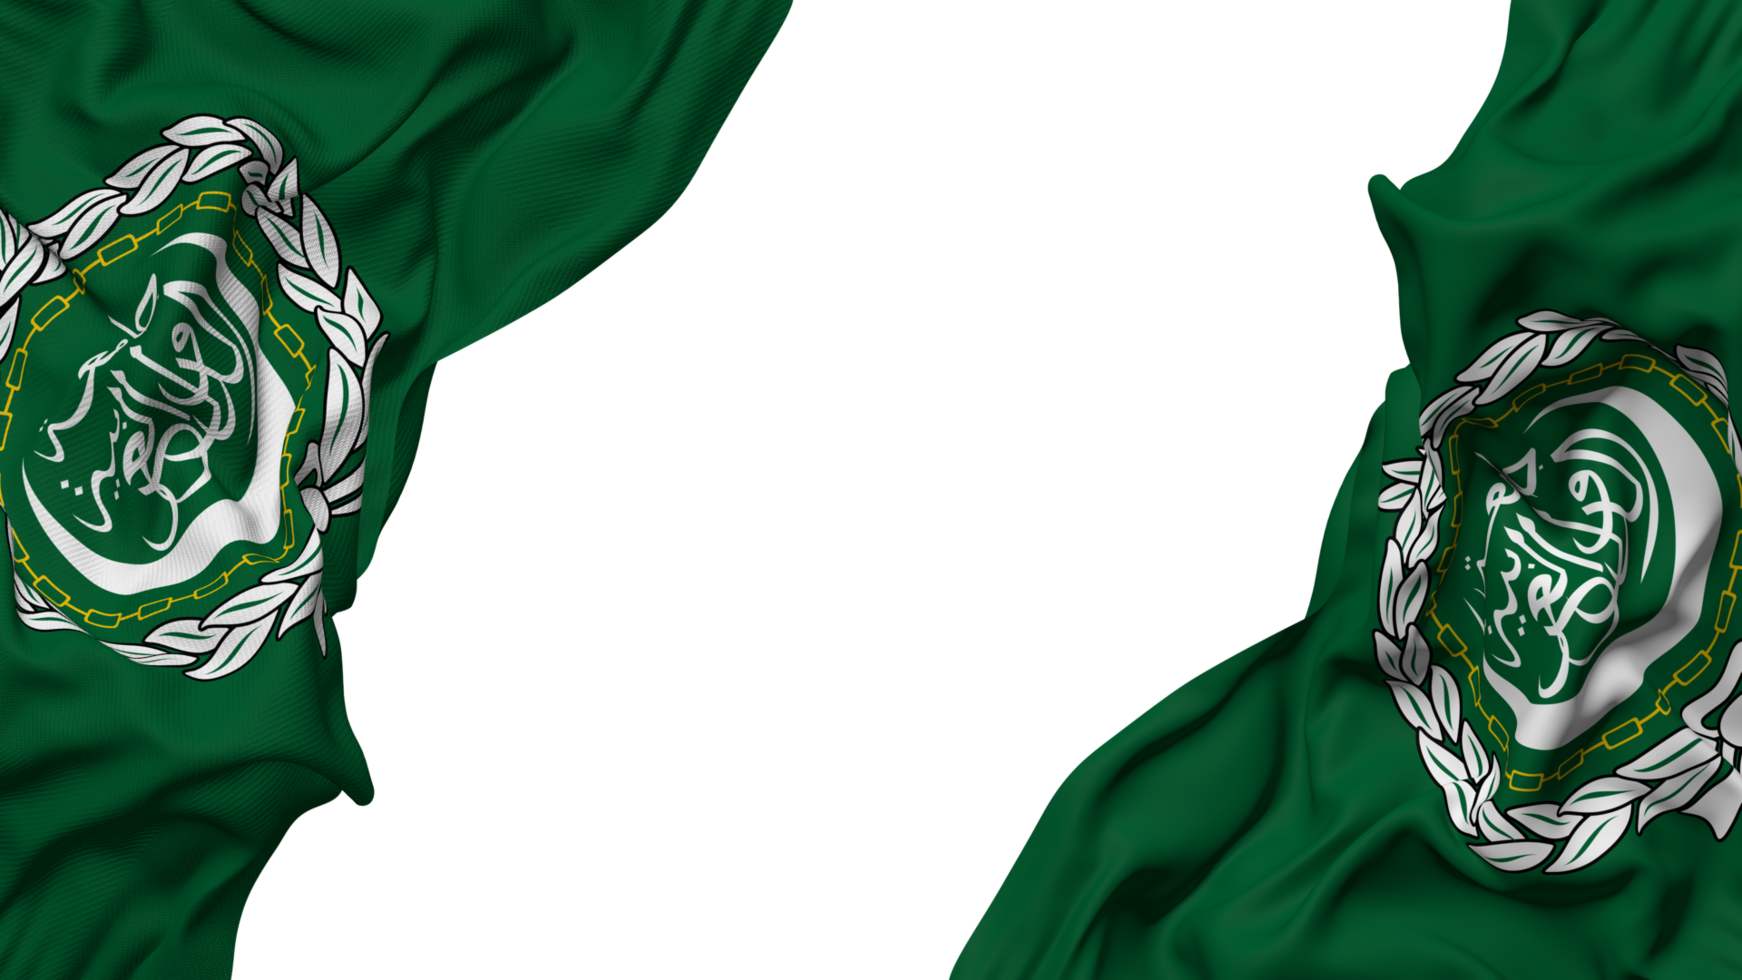 Arab League Flag Cloth Wave Banner in the Corner with Bump and Plain Texture, Isolated, 3D Rendering png